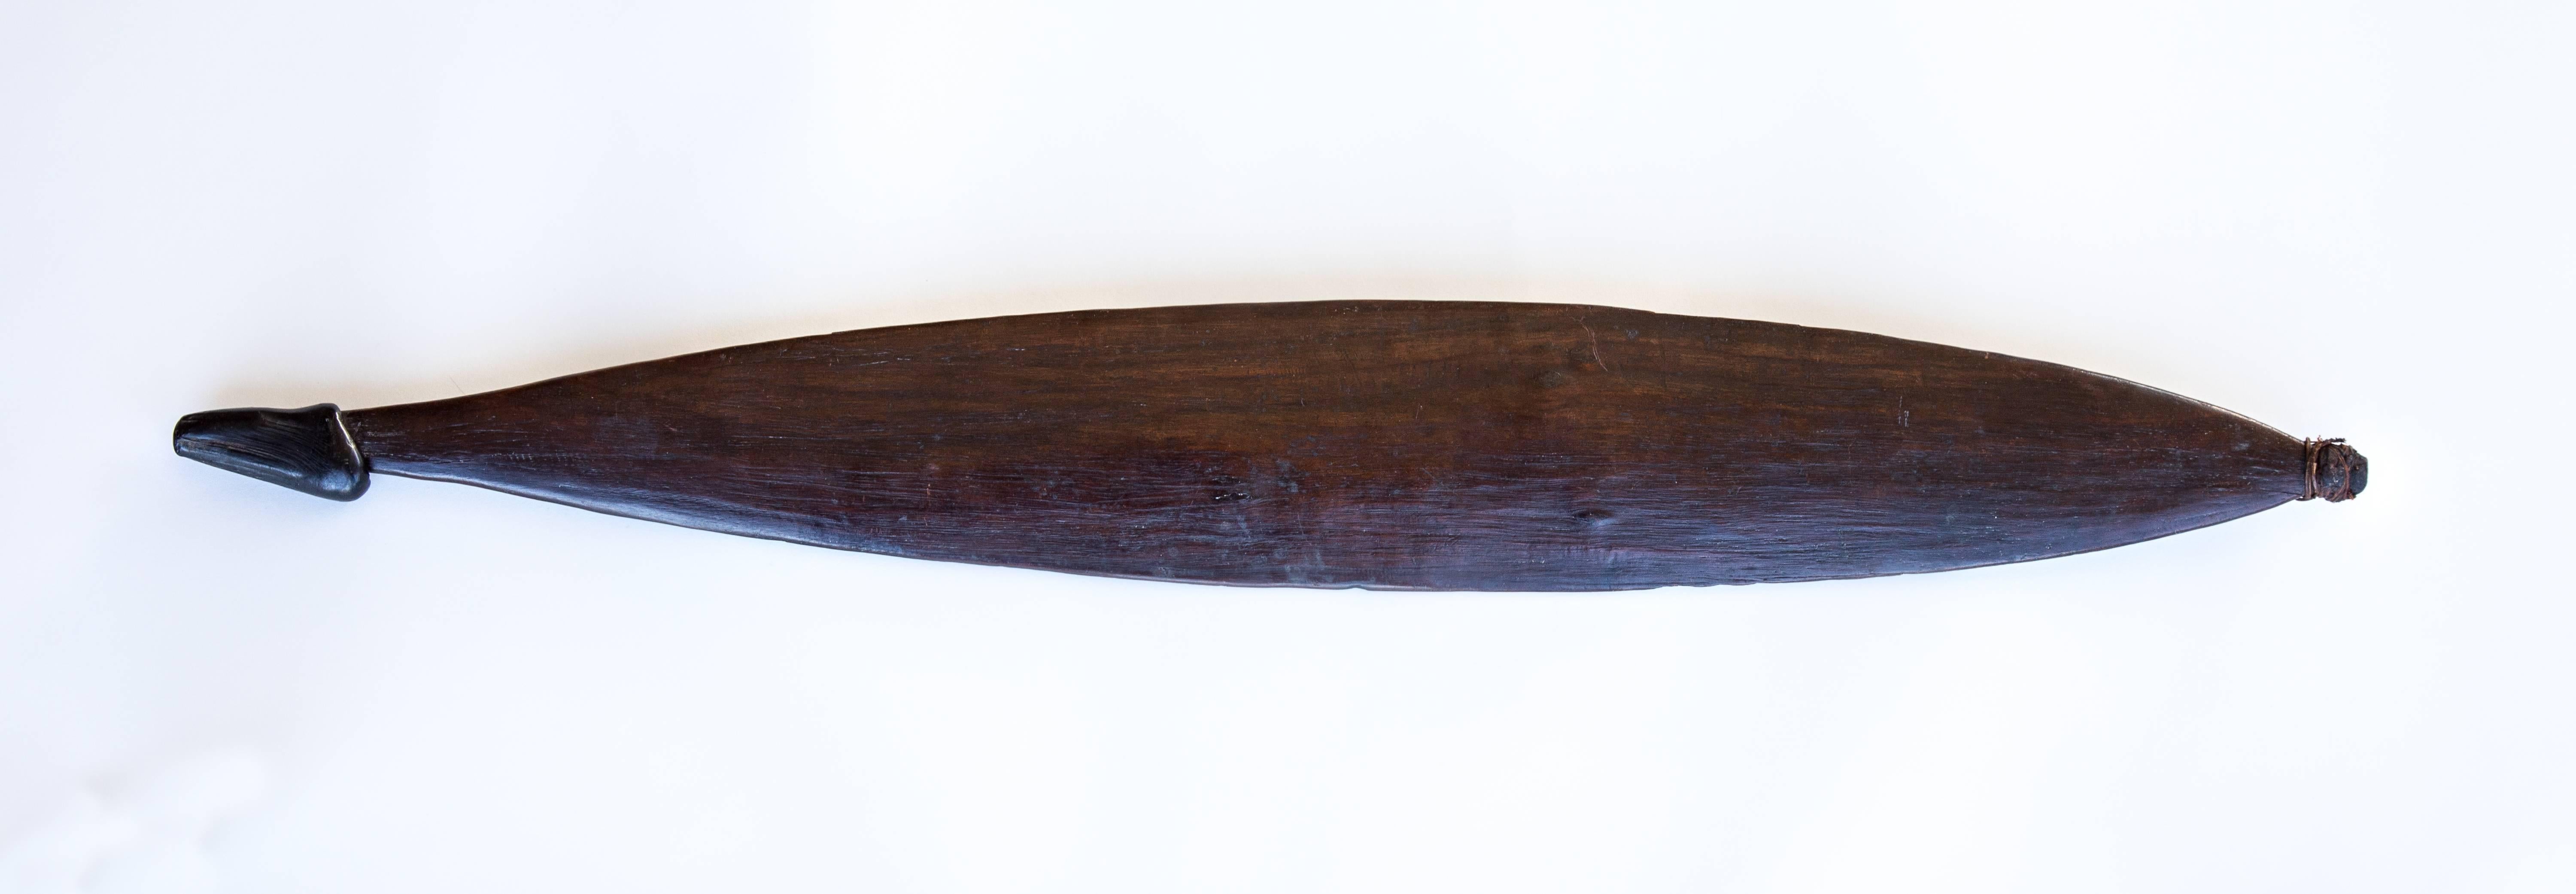 Tribal Rare and Early 19th Century Spear-Thrower Woomera 'H' For Sale